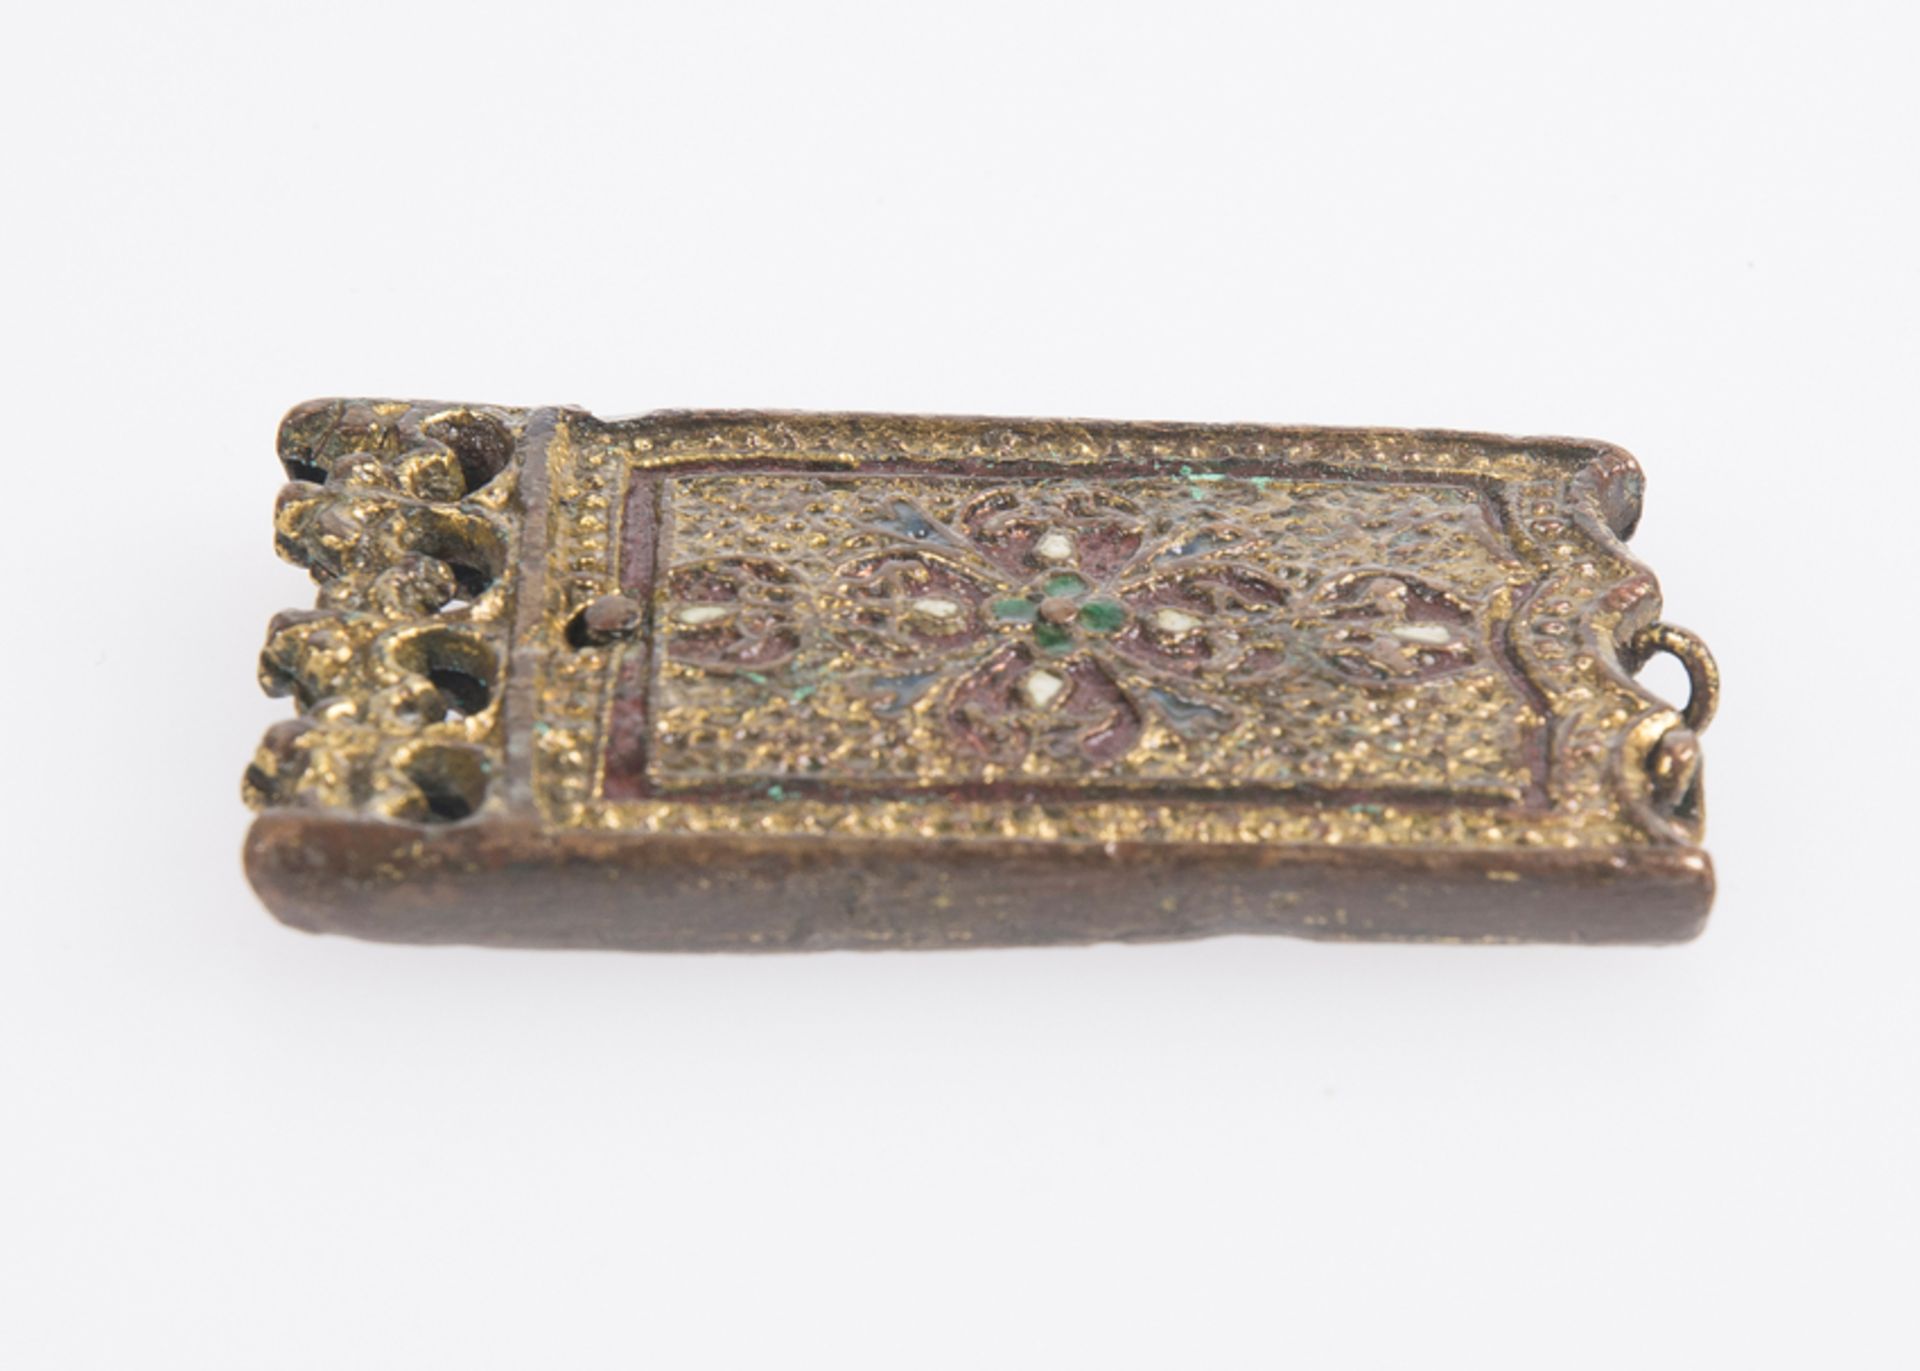 Chased, gilded and enamelled bronze buckle or ornament. Possibly Nasrid. 14th - 15th century. - Bild 3 aus 4